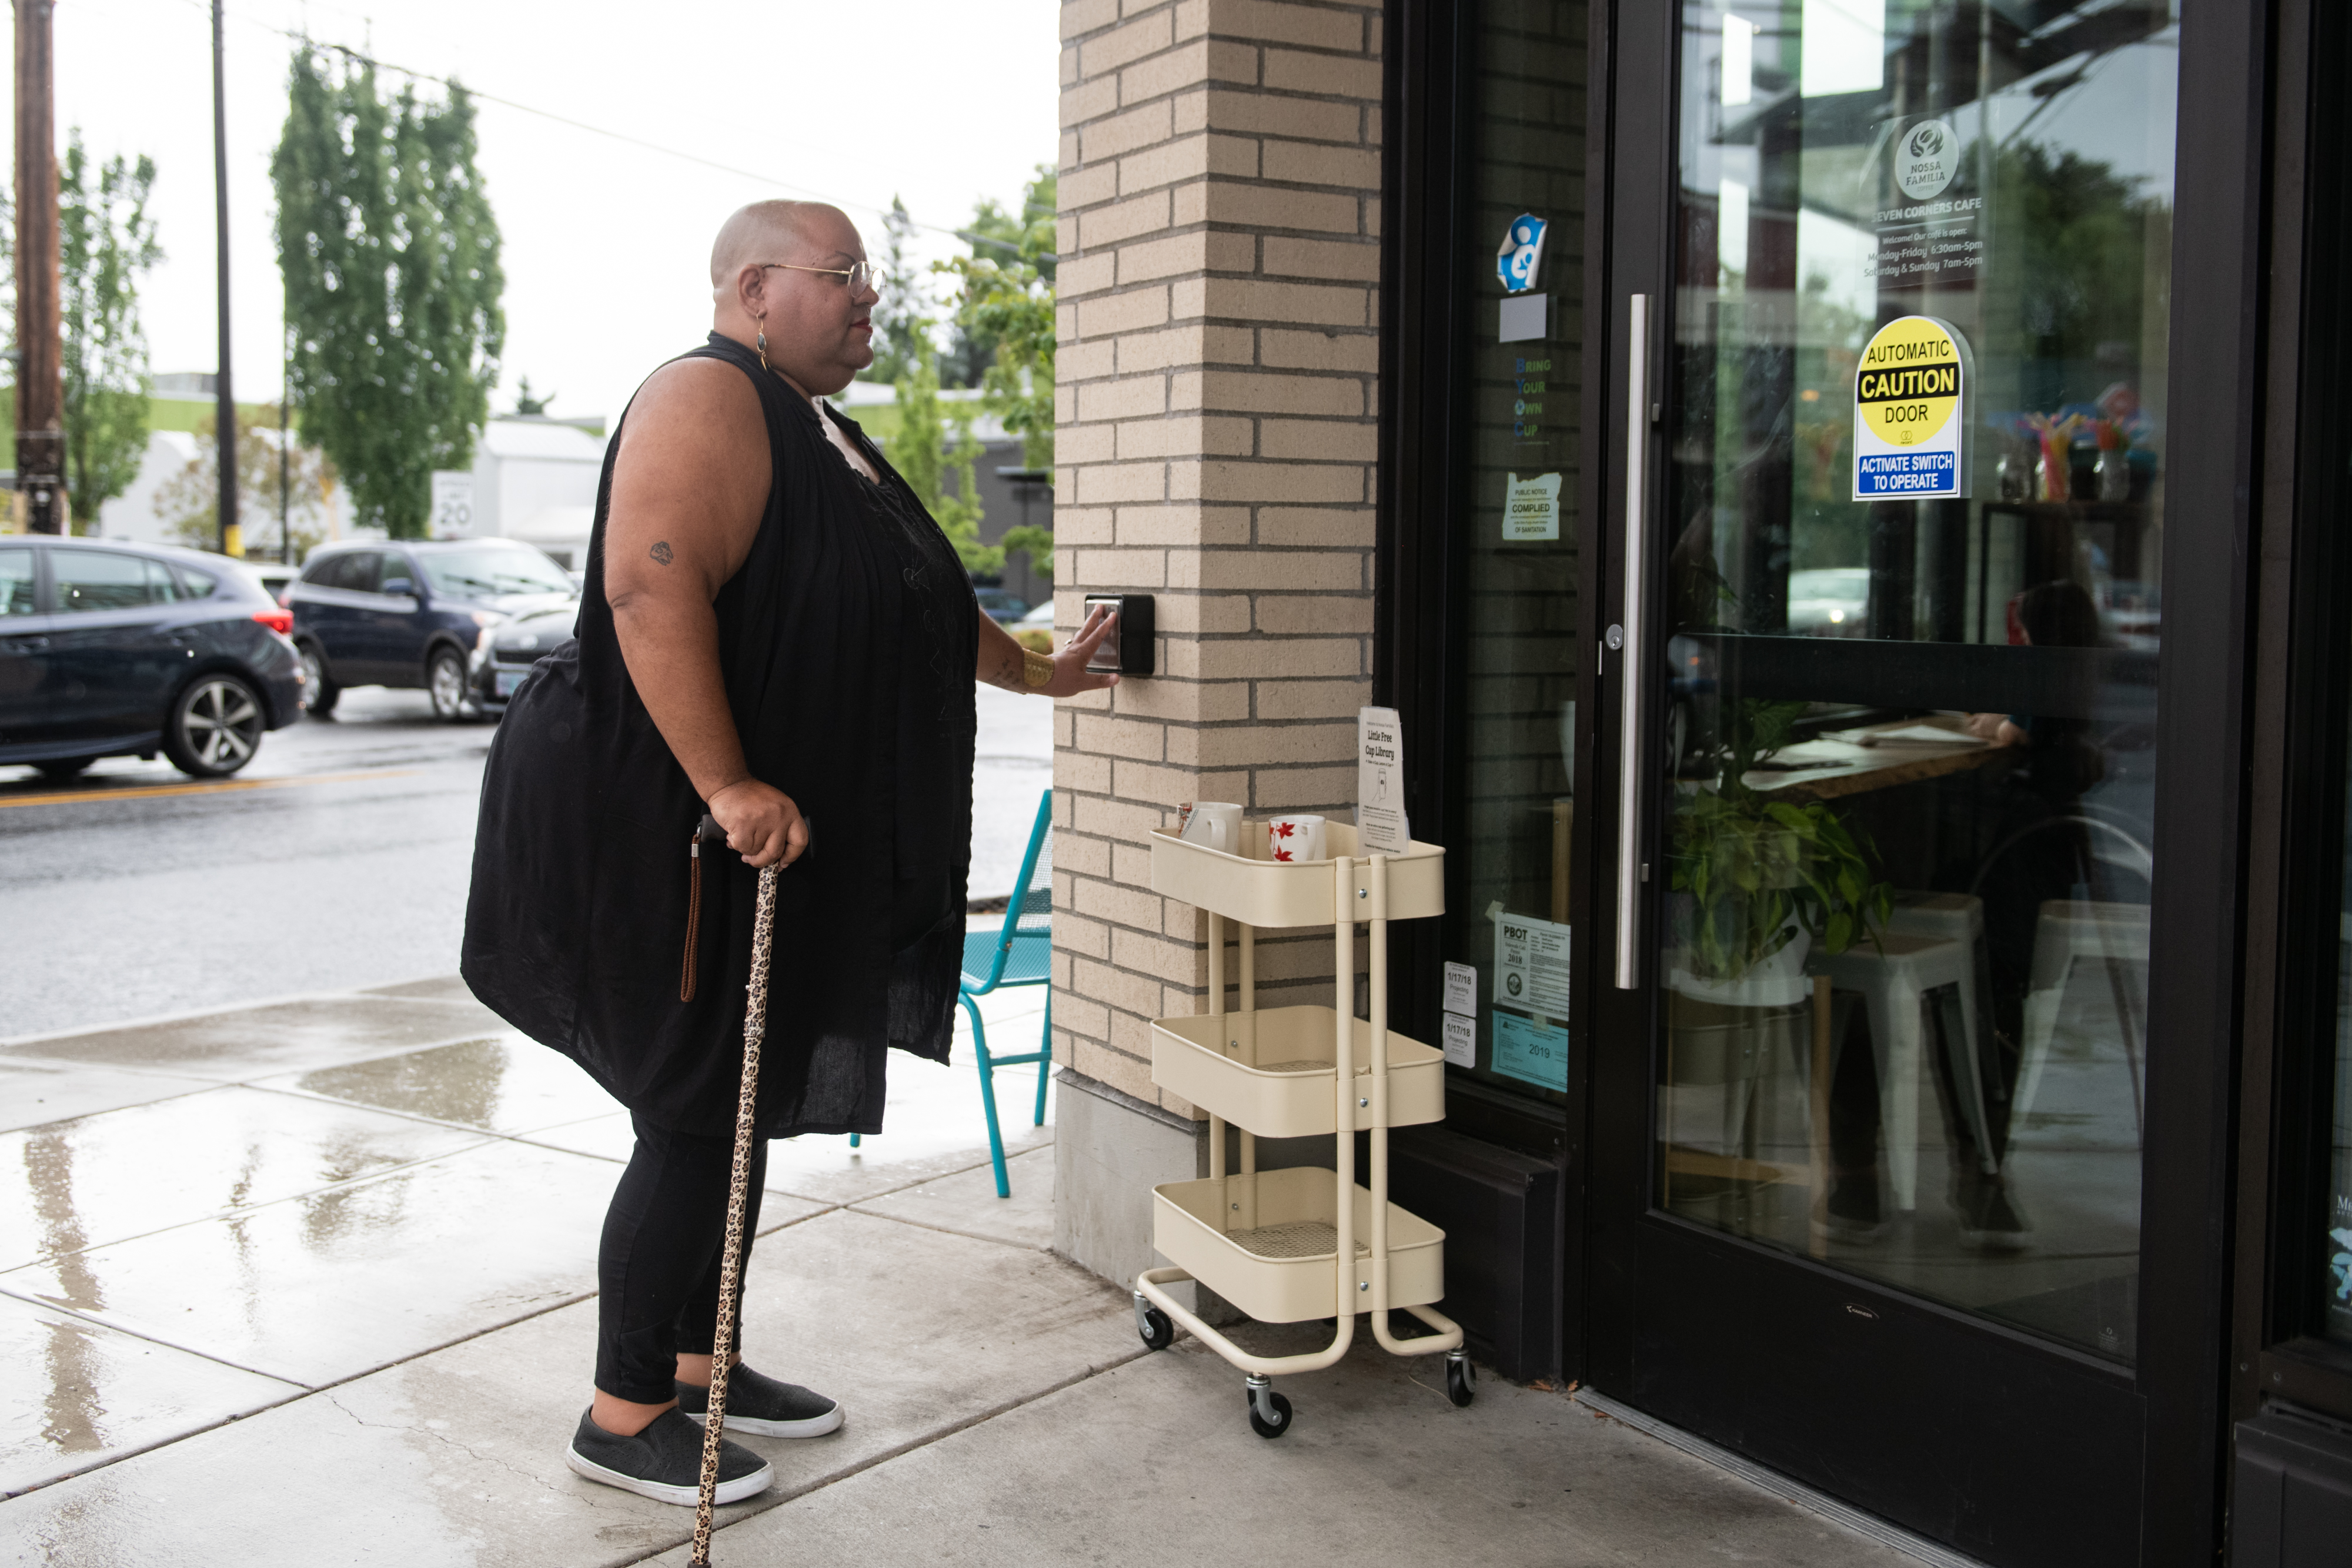 A Black non-binary person with a leopard print cane presses a wall-mounted push button to open the cafe door. They are dressed in all black and have a shaved head, glasses, and a red lip on. Attribution: Disabled and Here collection.